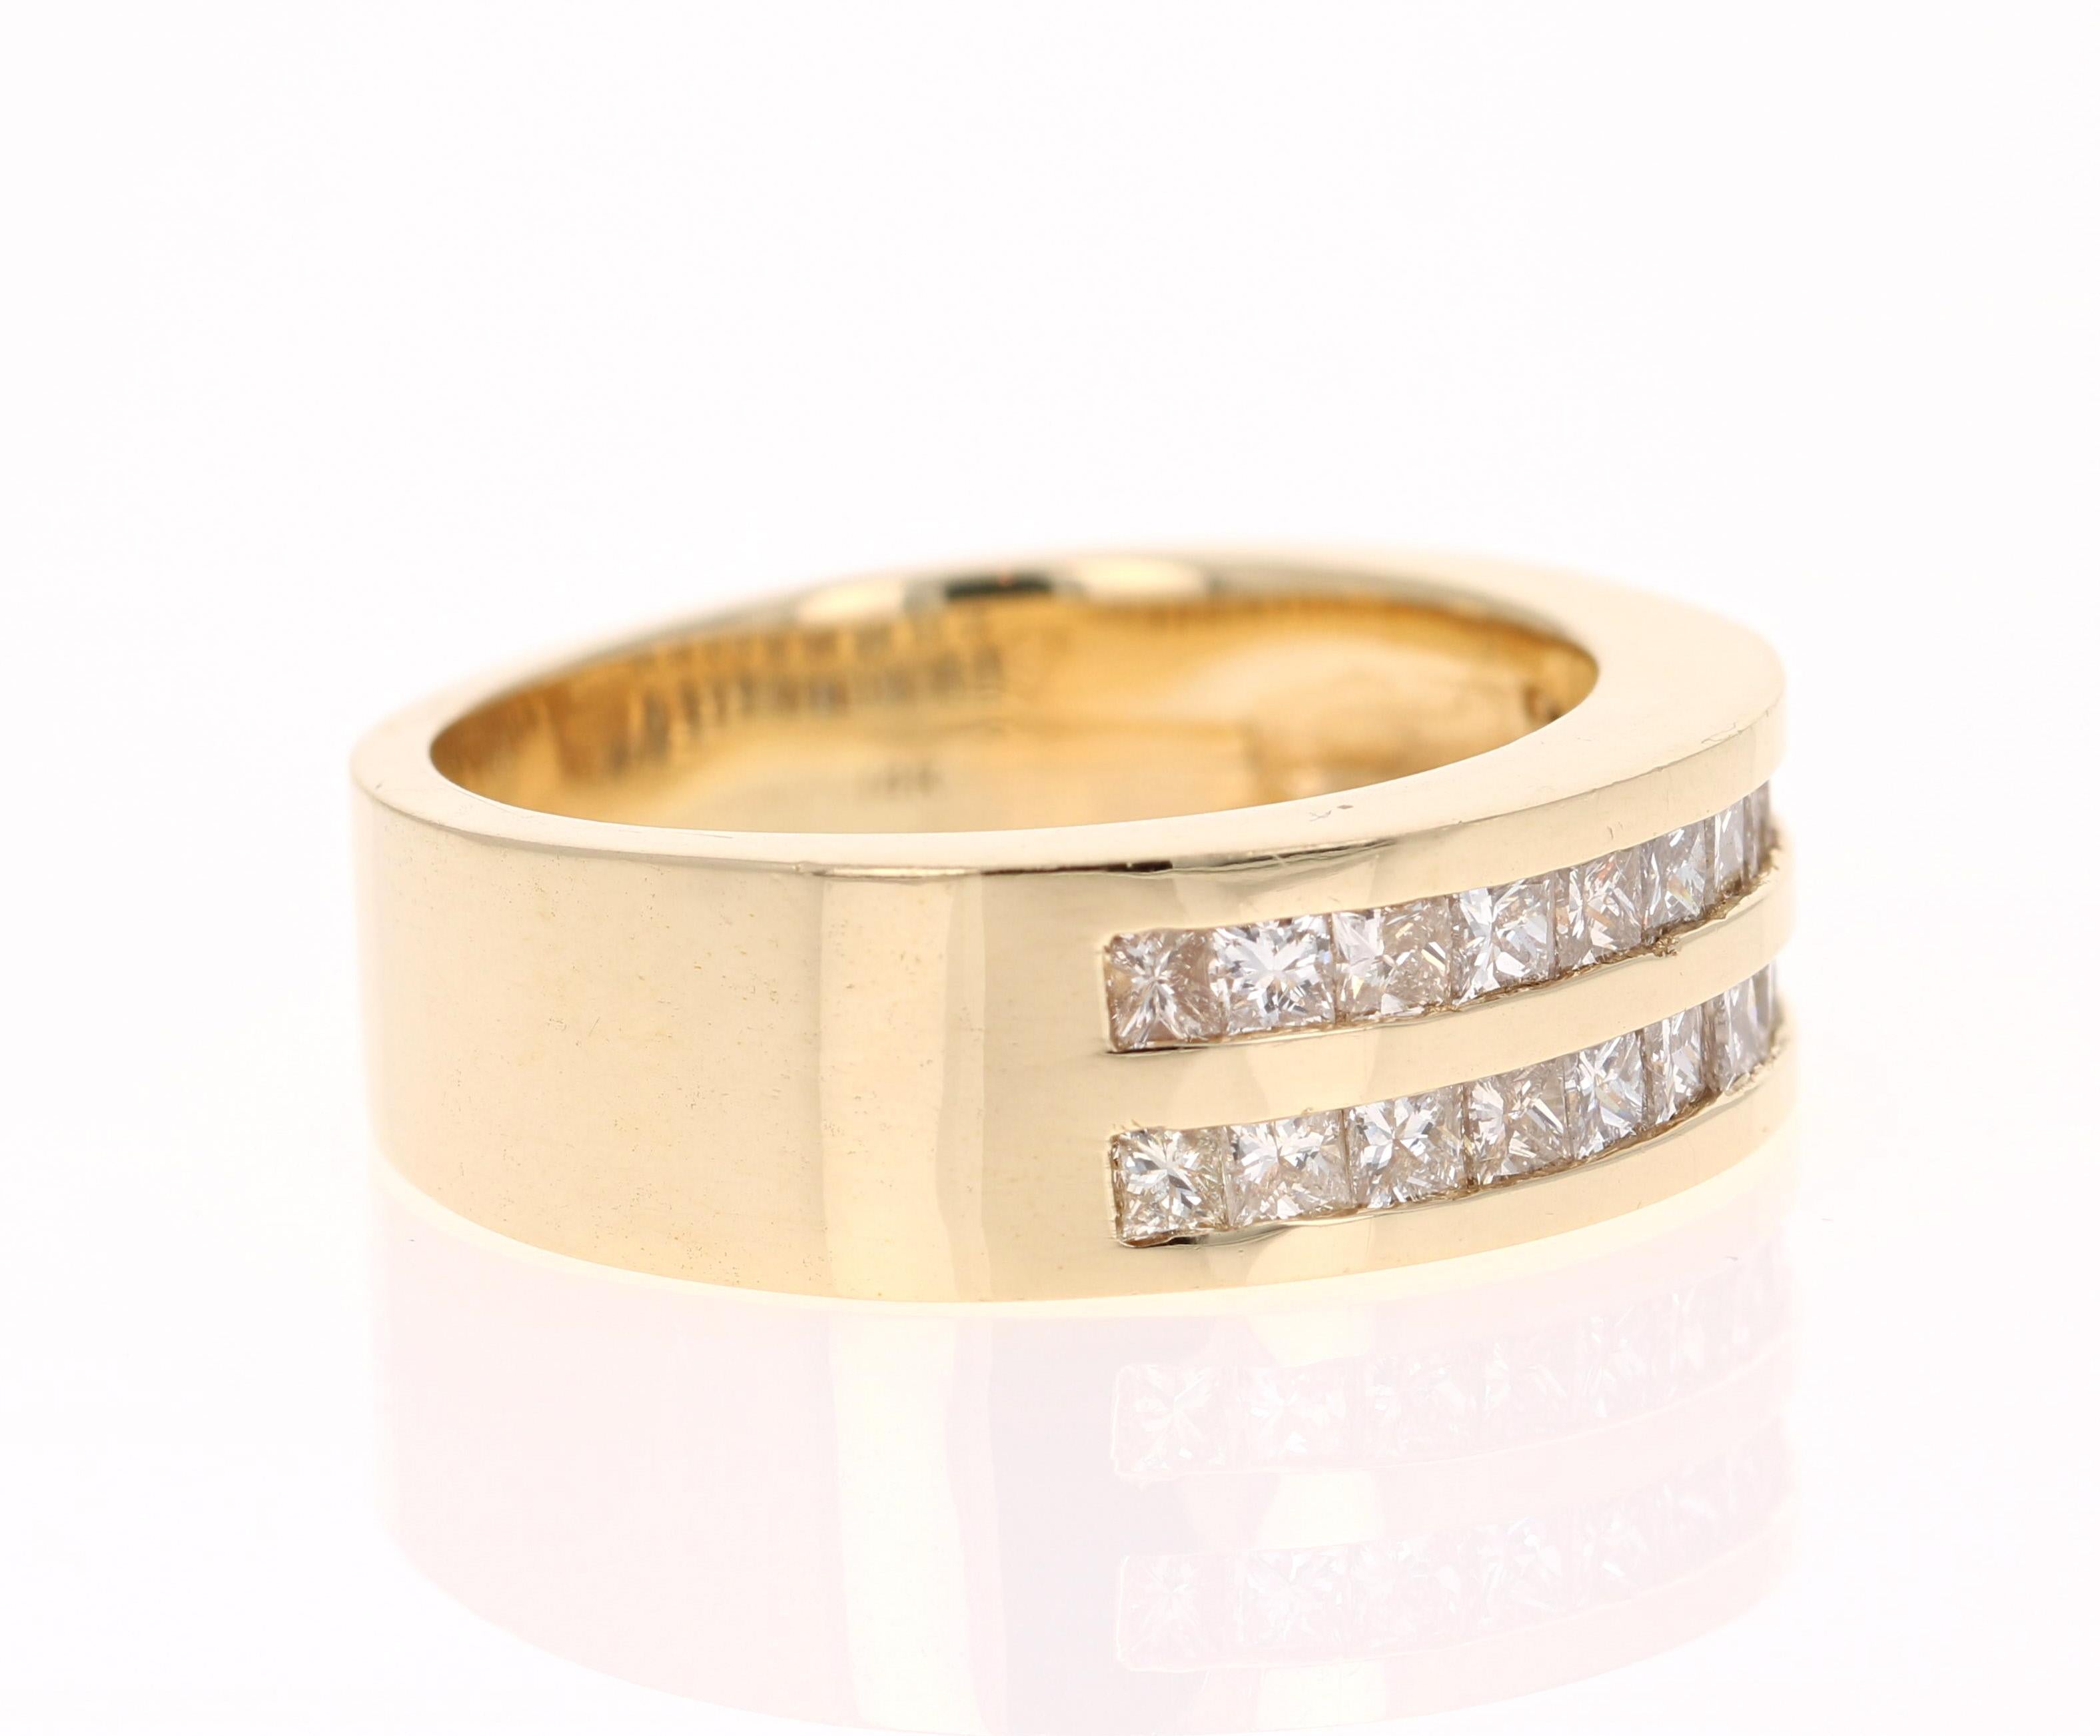 We have a Men's Collection of Fine Jewelry!  Beautiful, Bold, Masculine and Simple Men's Wedding Rings/Bands. 

This Men's Band has 24 Princess Cut Diamonds that weigh 1.78 Carats.  The total carat weight is 1.78 Carats.  The Clarity and Color of